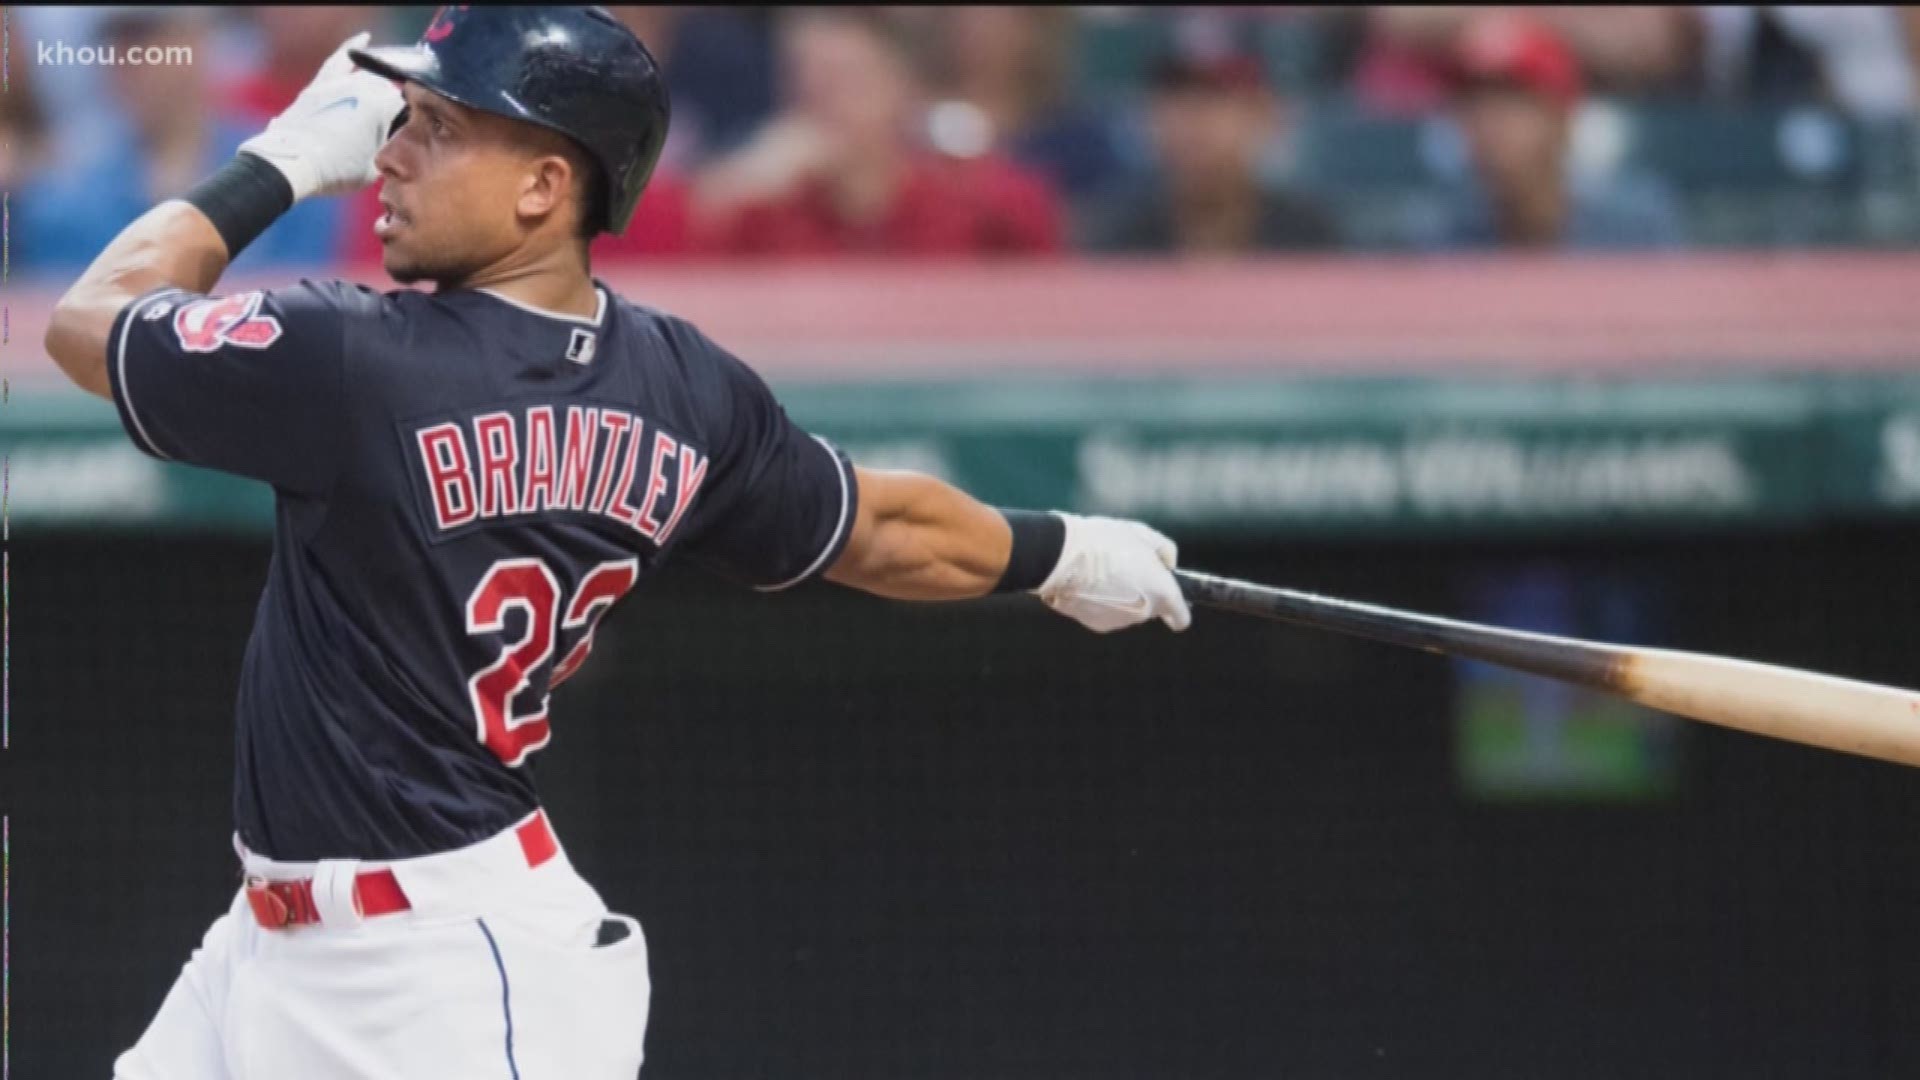 A person familiar with the negotiations tells The Associated Press the Houston Astros have agreed to a two-year deal with free agent outfielder Michael Brantley.